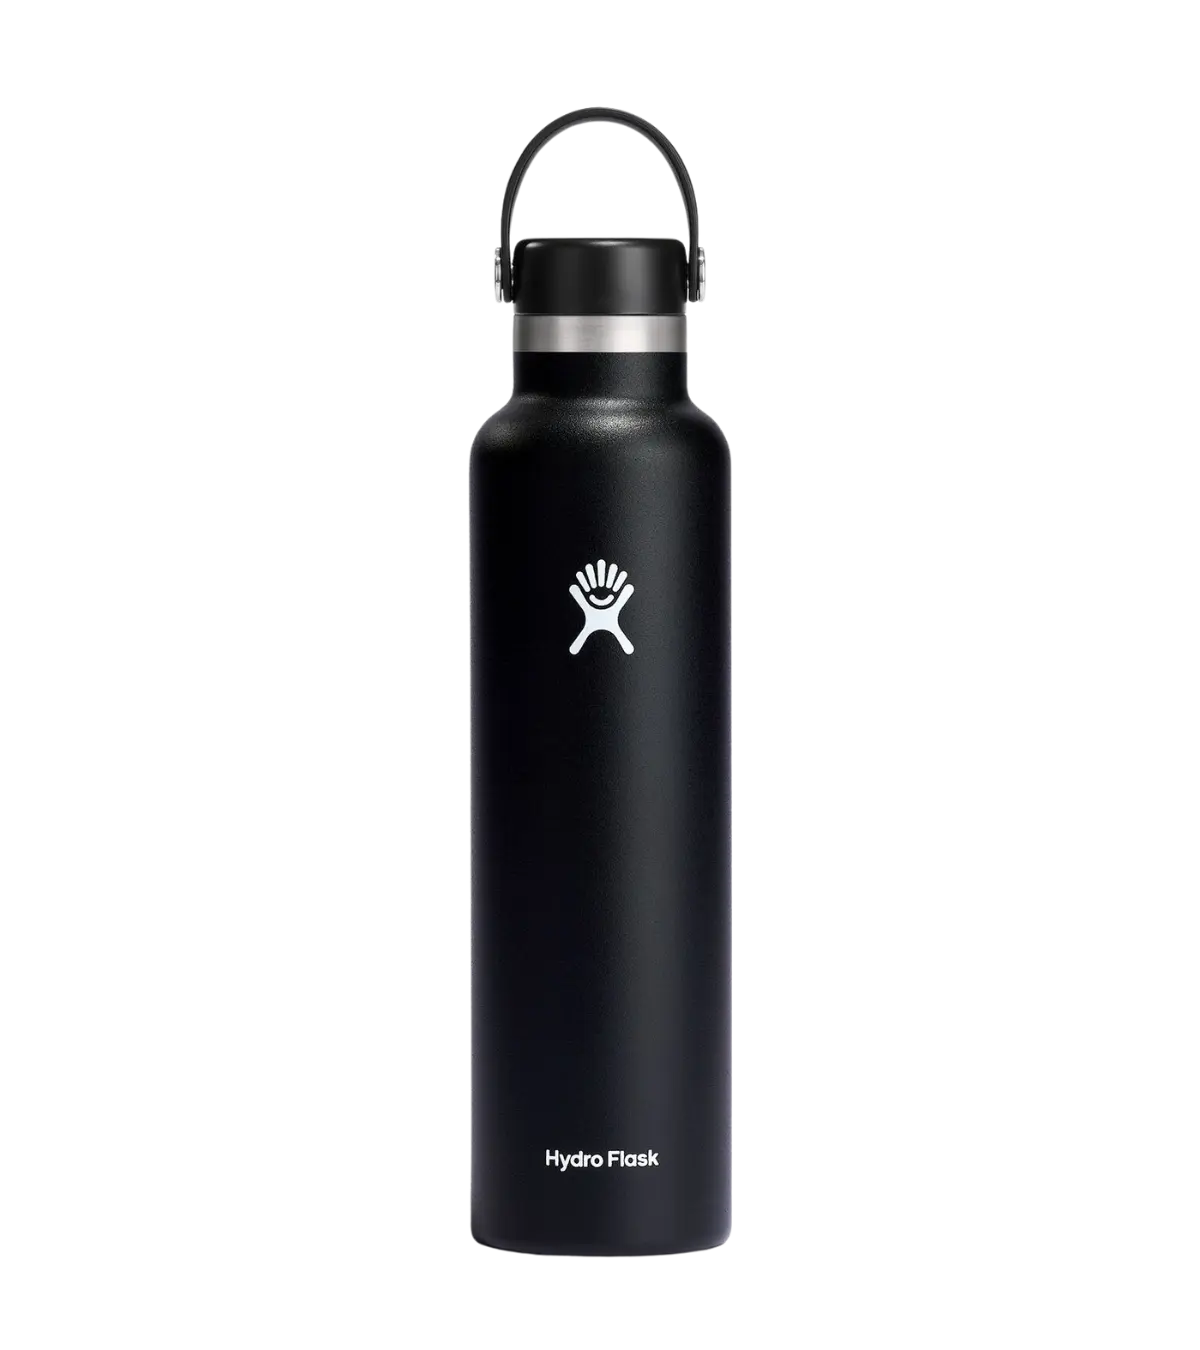 Hydro Flask, 24 Ounce Standard Mouth (Black)